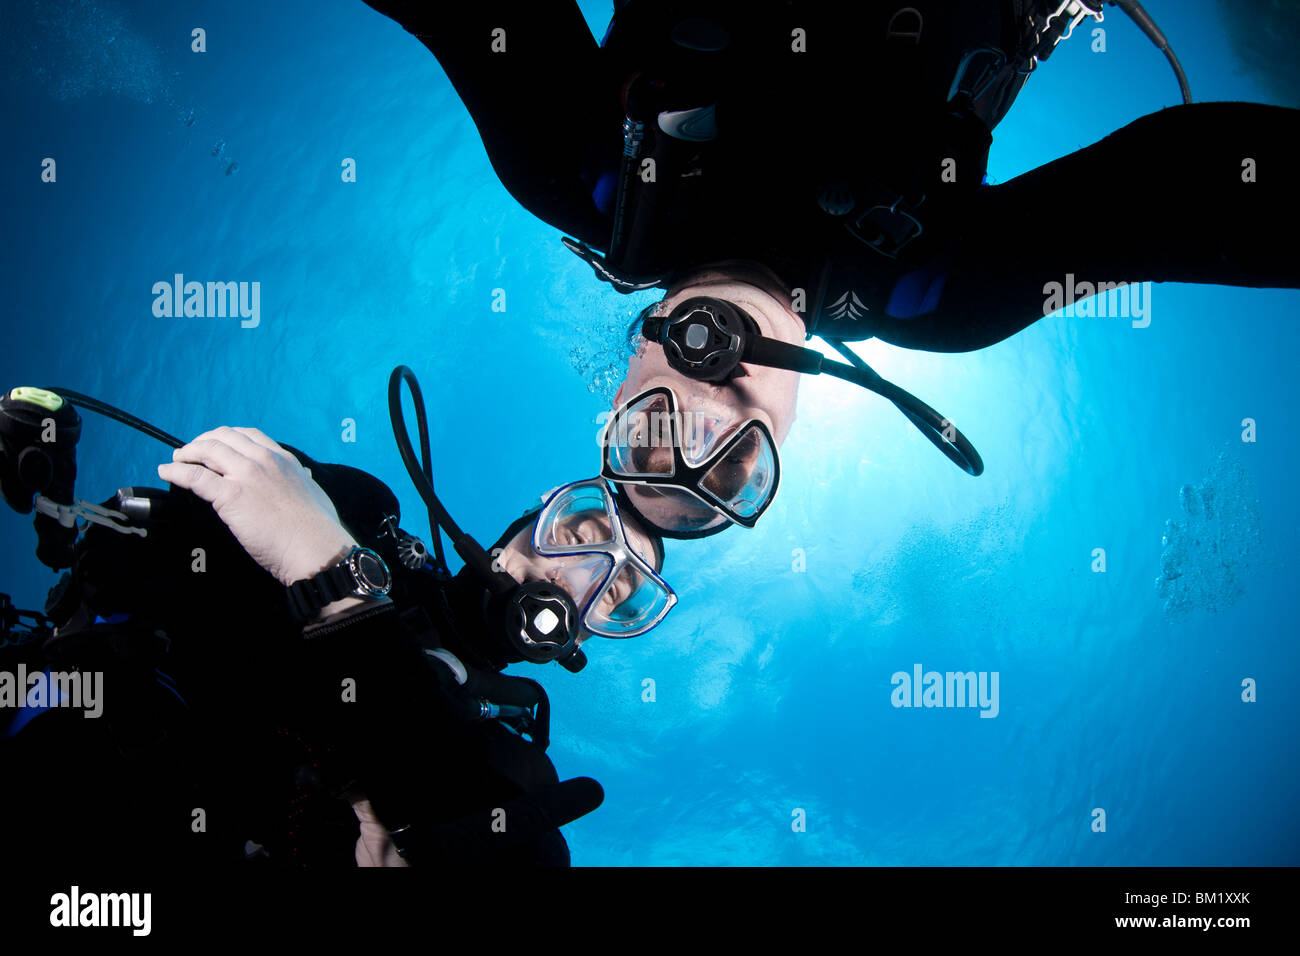 Scuba divers hovering together on a safety stop. Stock Photo